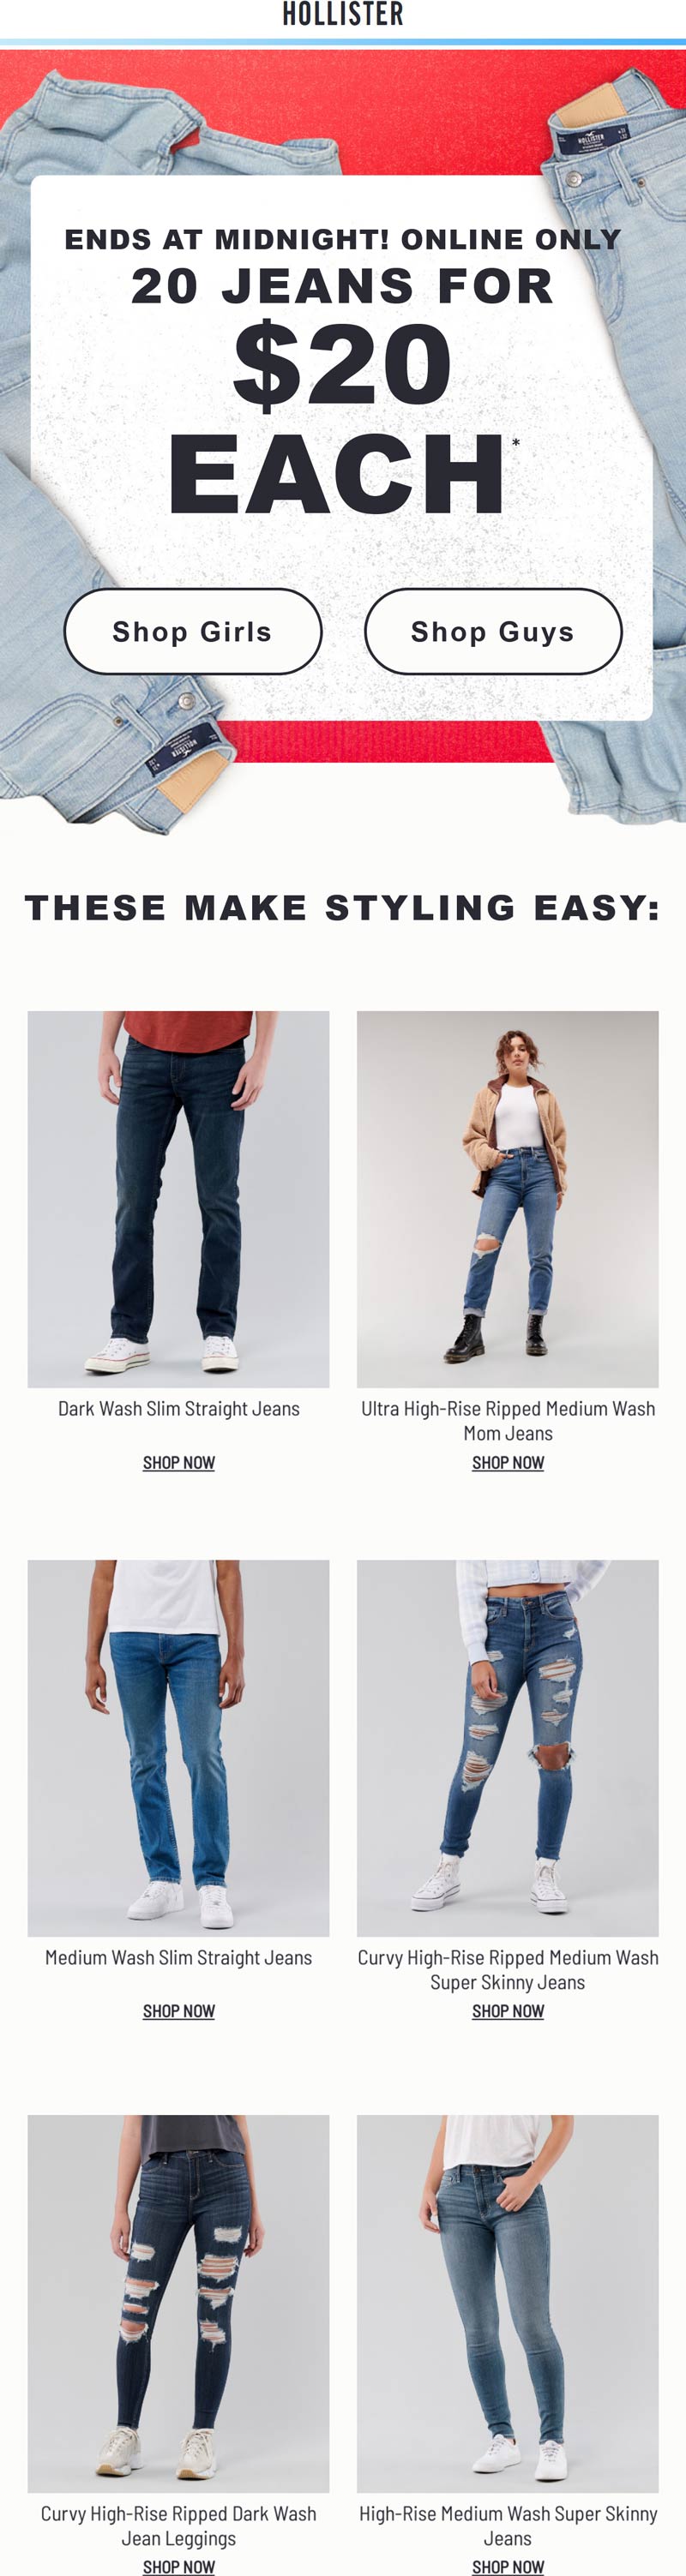 Hollister stores Coupon  $20 jeans online today at Hollister #hollister 